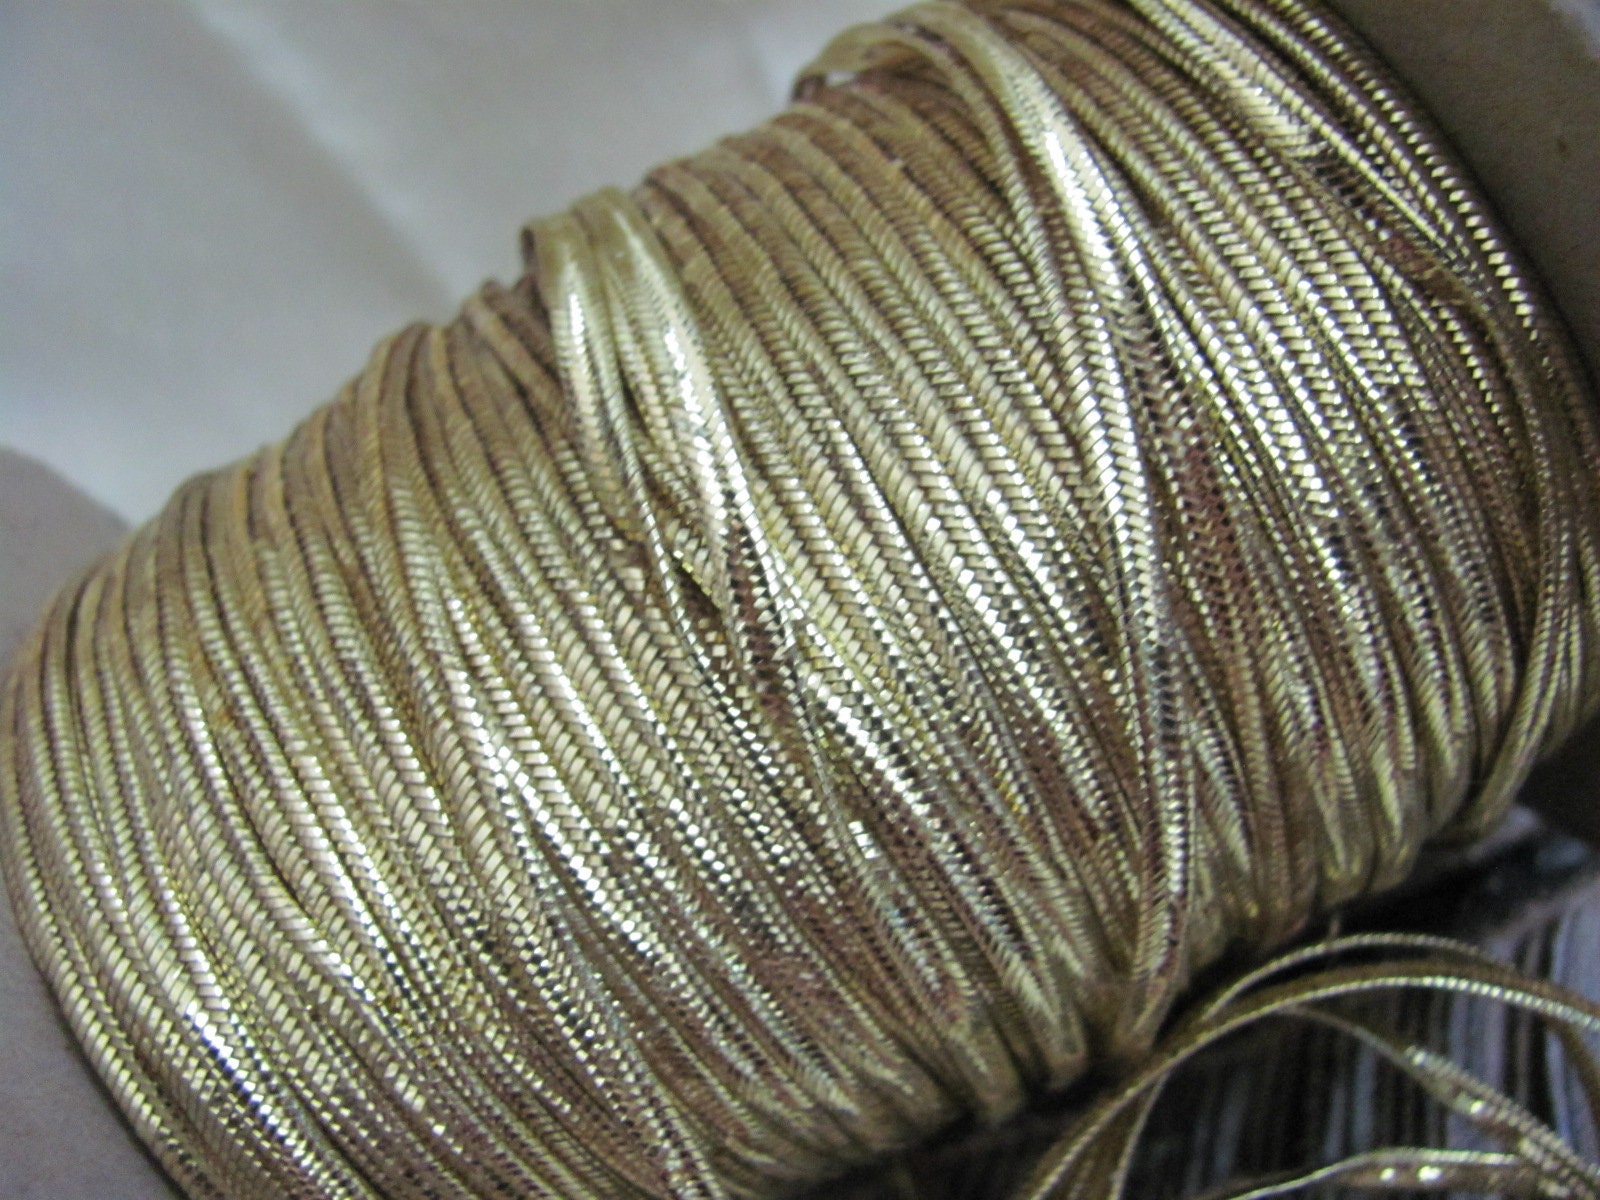 Twisted Cord Rope 2 Ply, 3mm, 25-yard, Gold Trim, Gold 